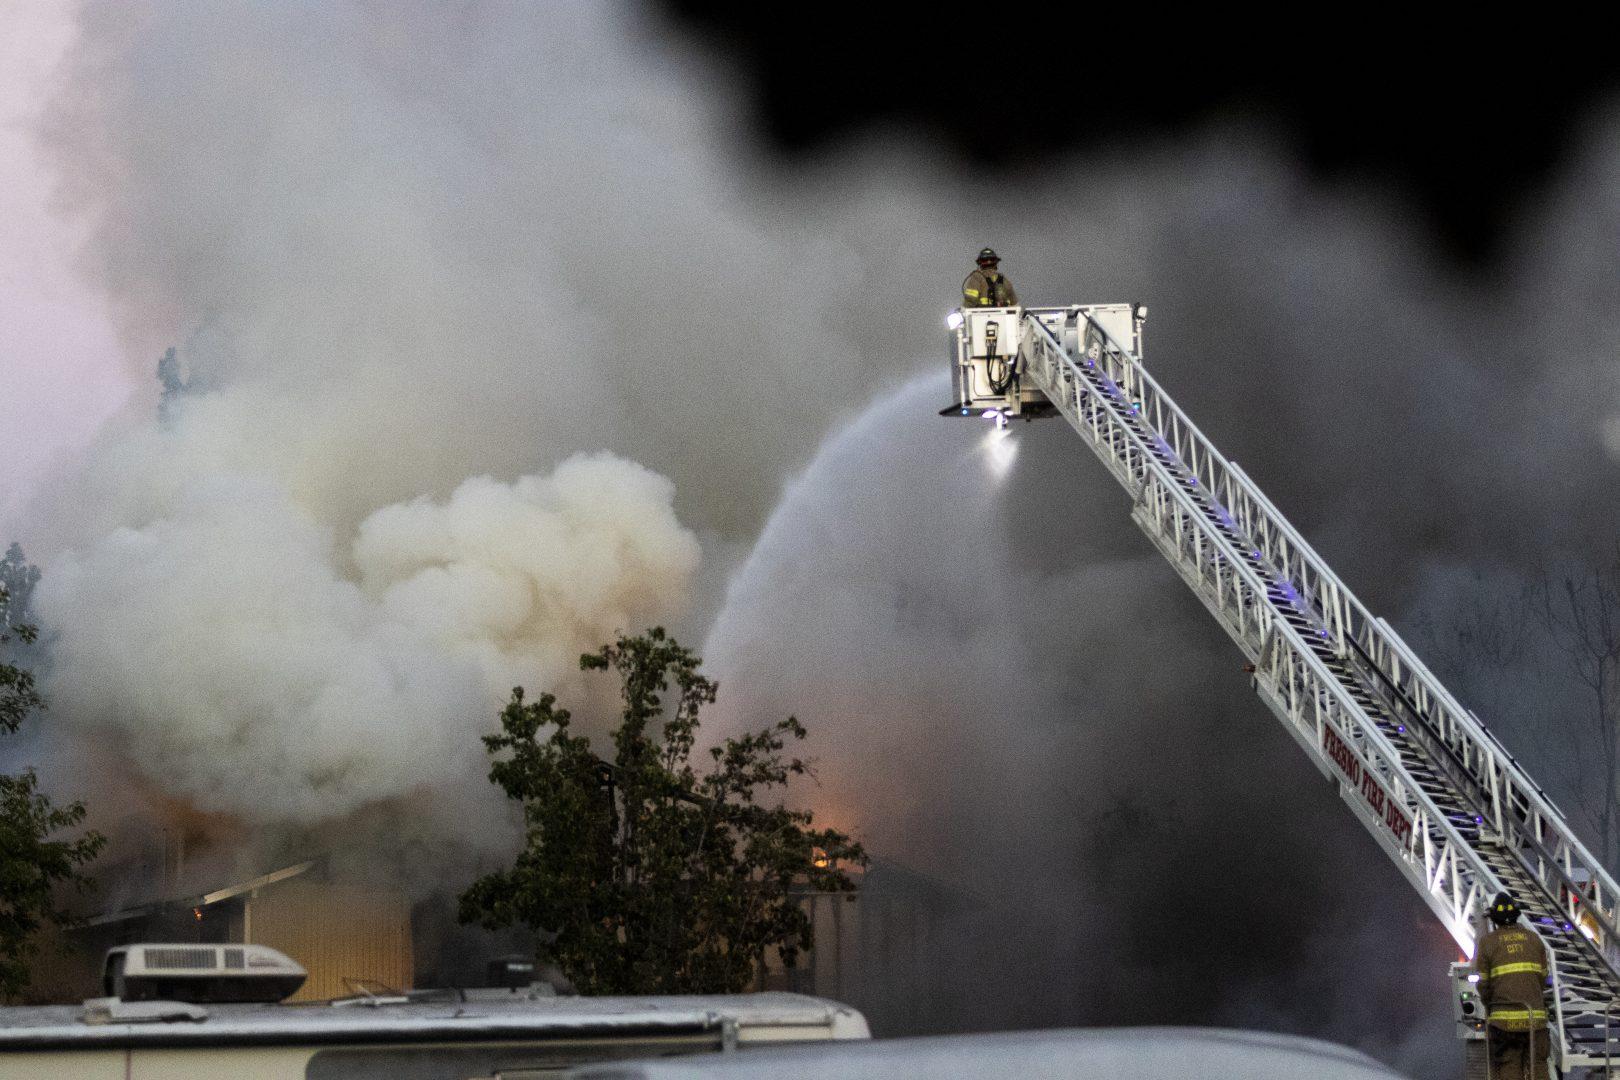 Firefighters work to put out the blaze at the Maplewood Apartments complex just south of Fresno State on Aug 18. The fire displaced 15 students and damaged 14 apartment units. (Larry Valenzuela/The Collegian)